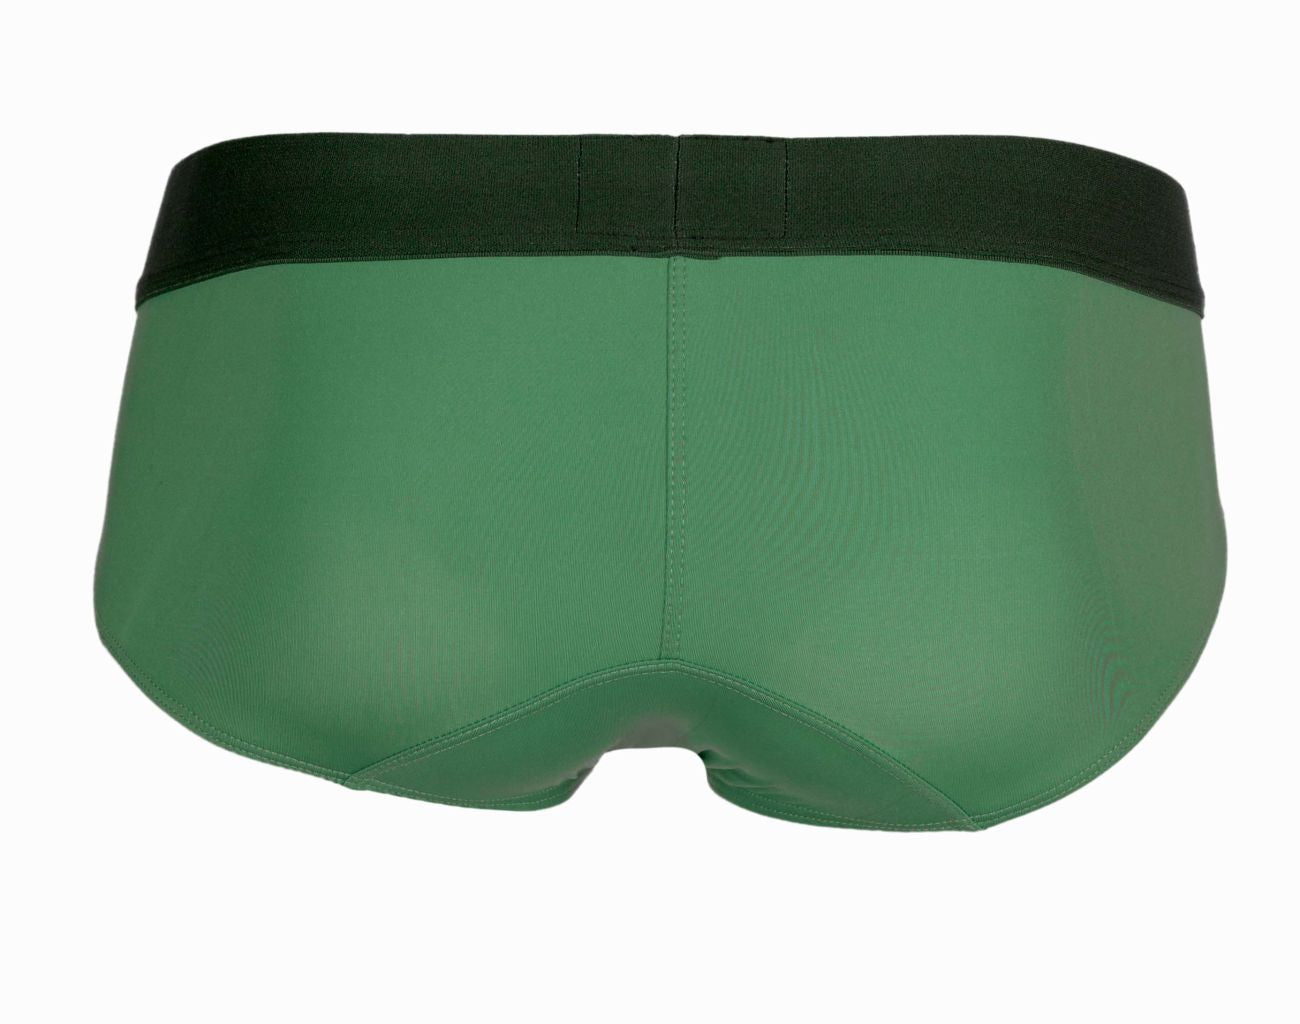 Clever 1146 Celestial Briefs Color Green